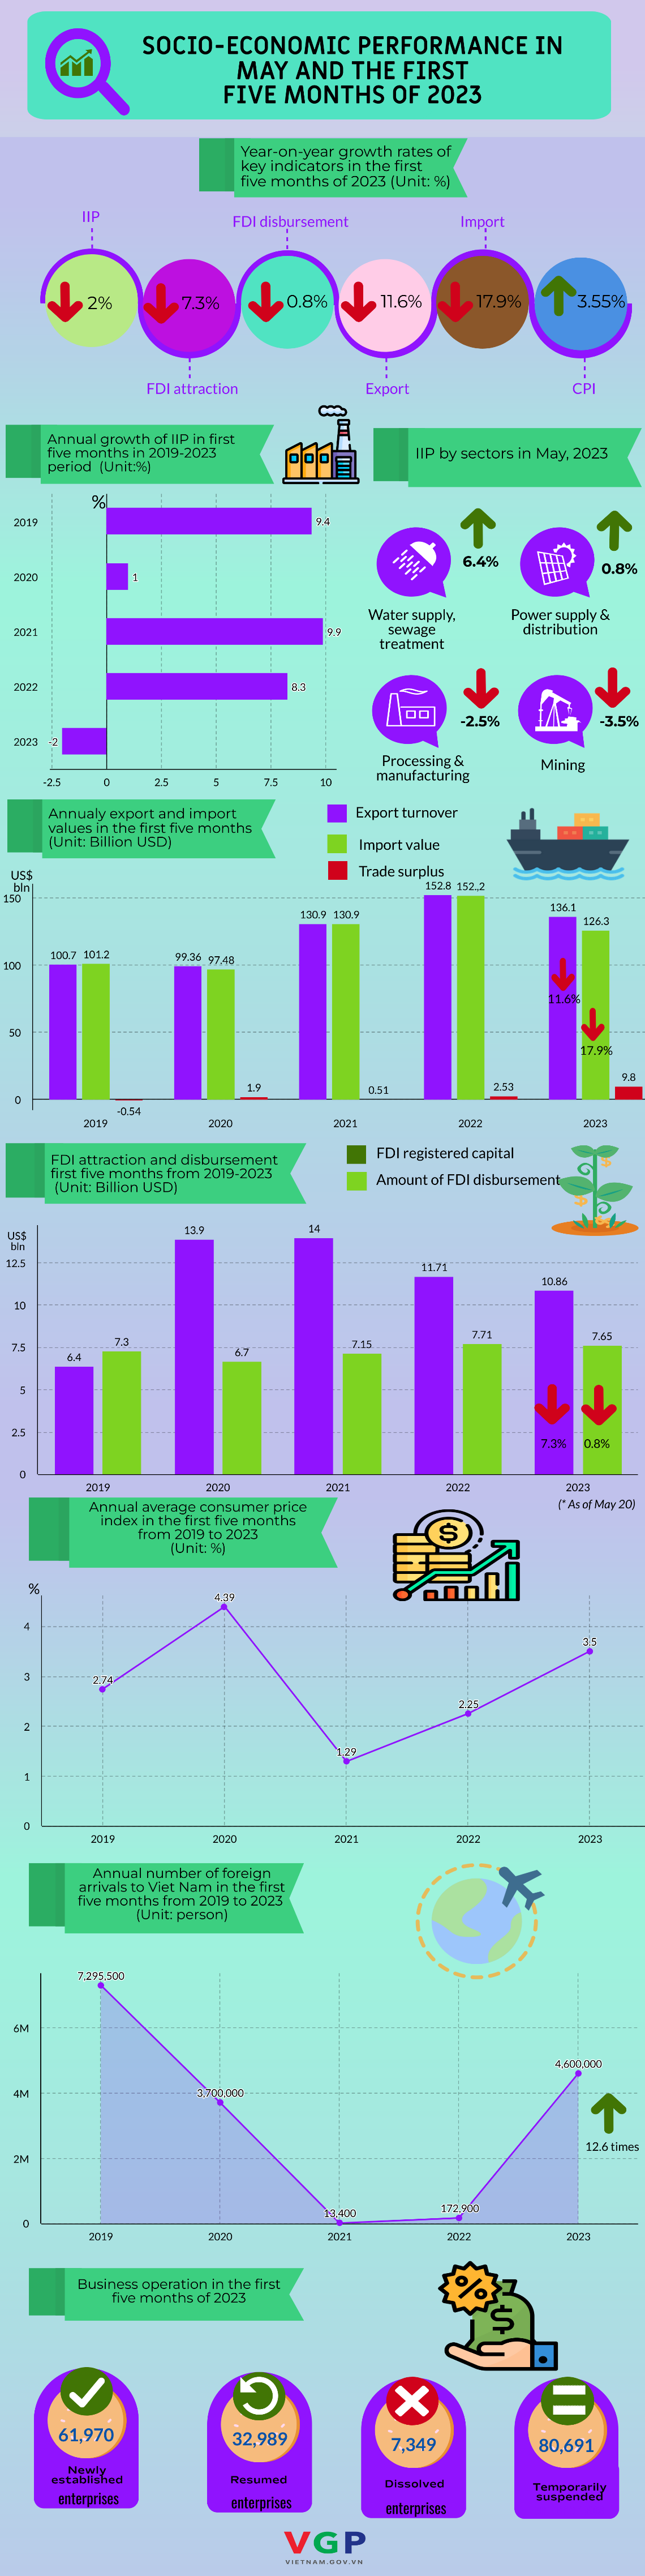 INFOGRAPHIC: SOCIAL-ECONOMIC PERFORMANCE IN FIRST FIVE MONTHS OF 2023 - Ảnh 1.